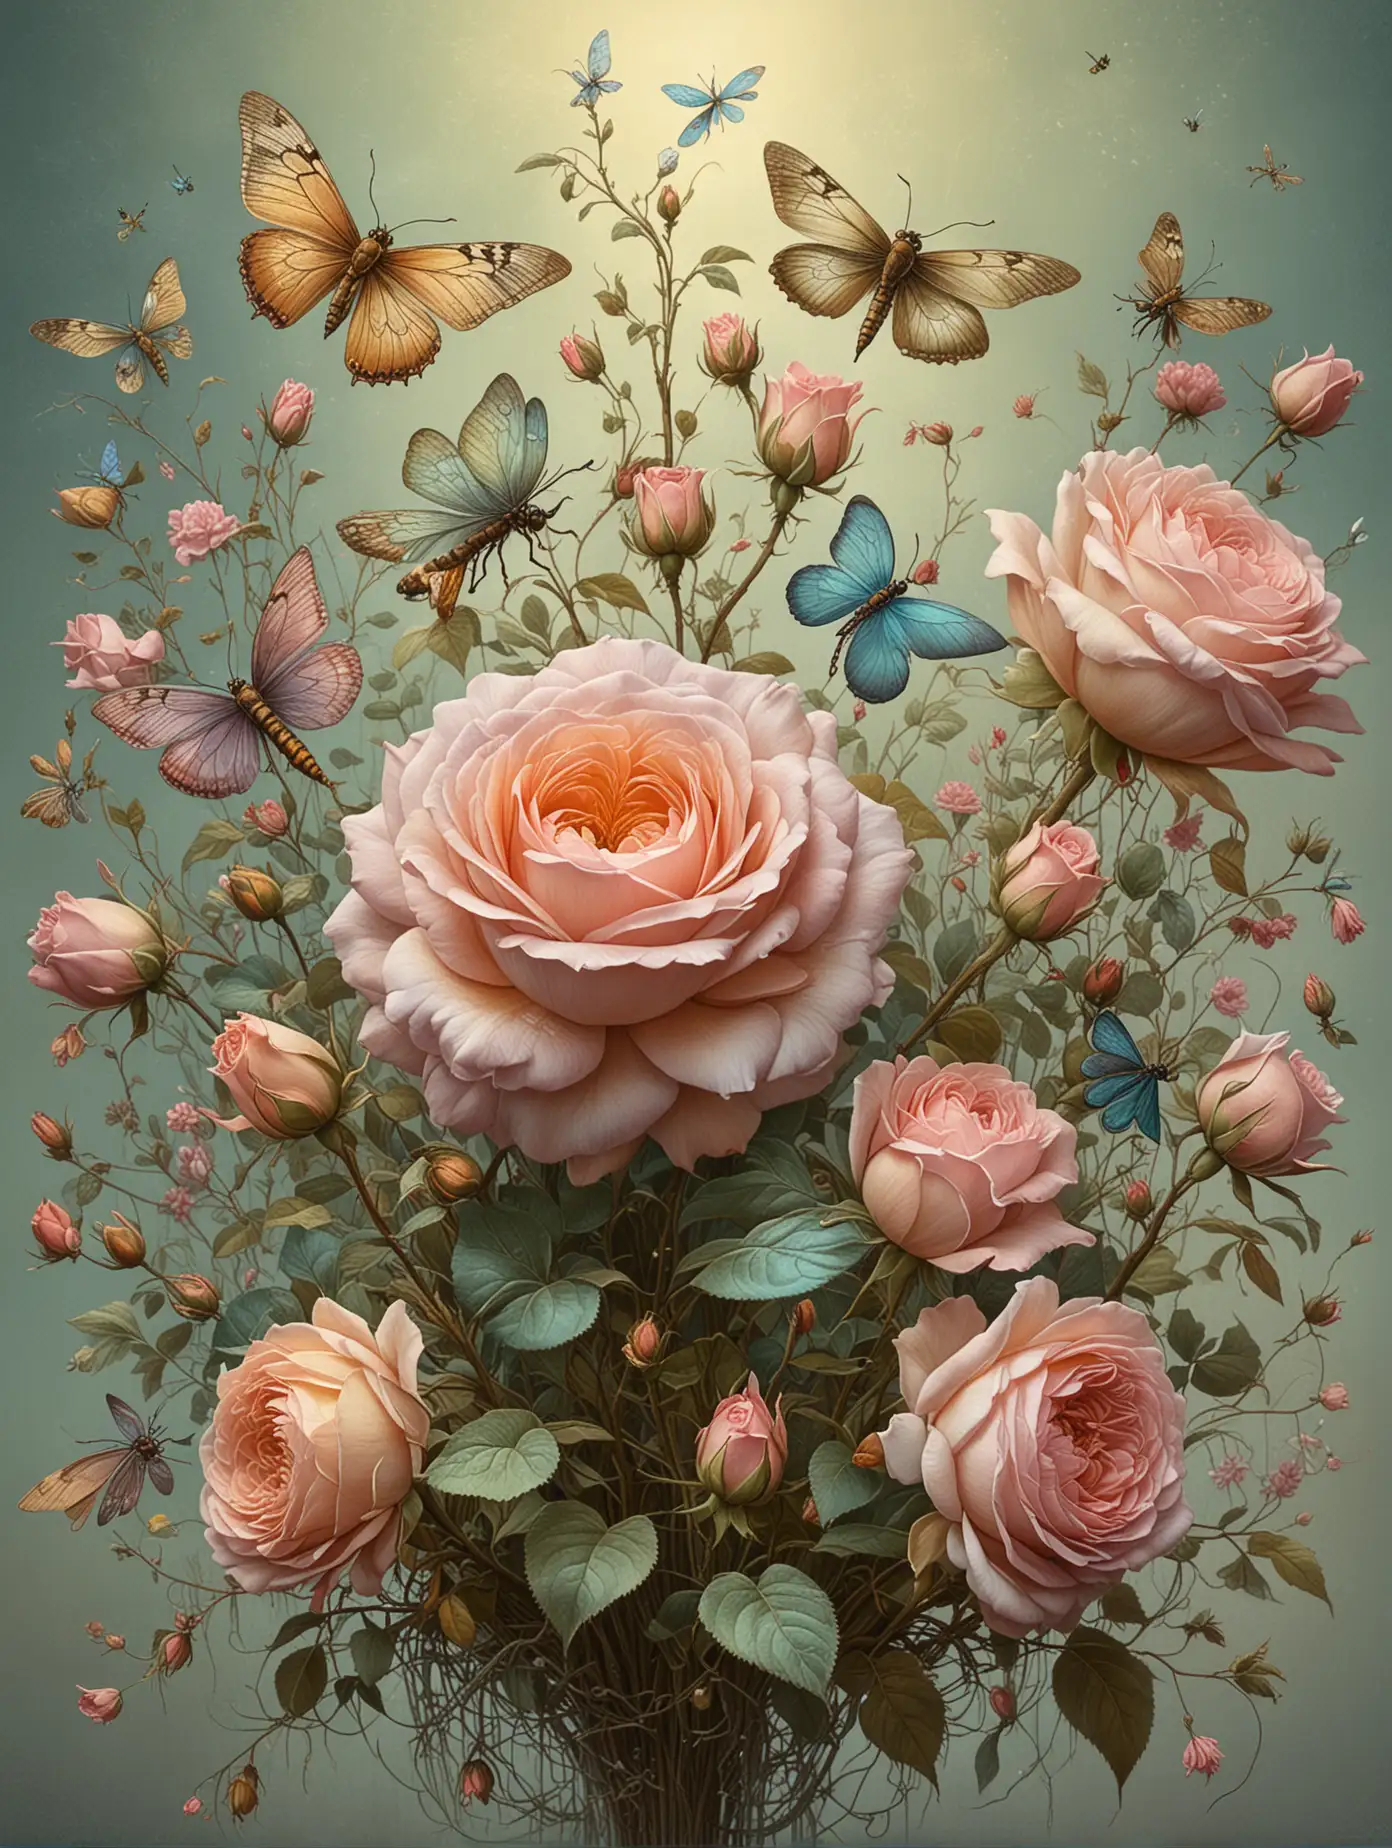 roses, pastel colors, vintage, kerem beyit, by Daniel Merriam, esao andrews, ornate, by Kerembeyit, inspired by Daniel Merriam, by Jan Kip, fire flies, dragonfly, butterfly, bee, daniel merriam, highly detailed digital artwork, antique, vintage, dusty, and rugged illustration, poster composition